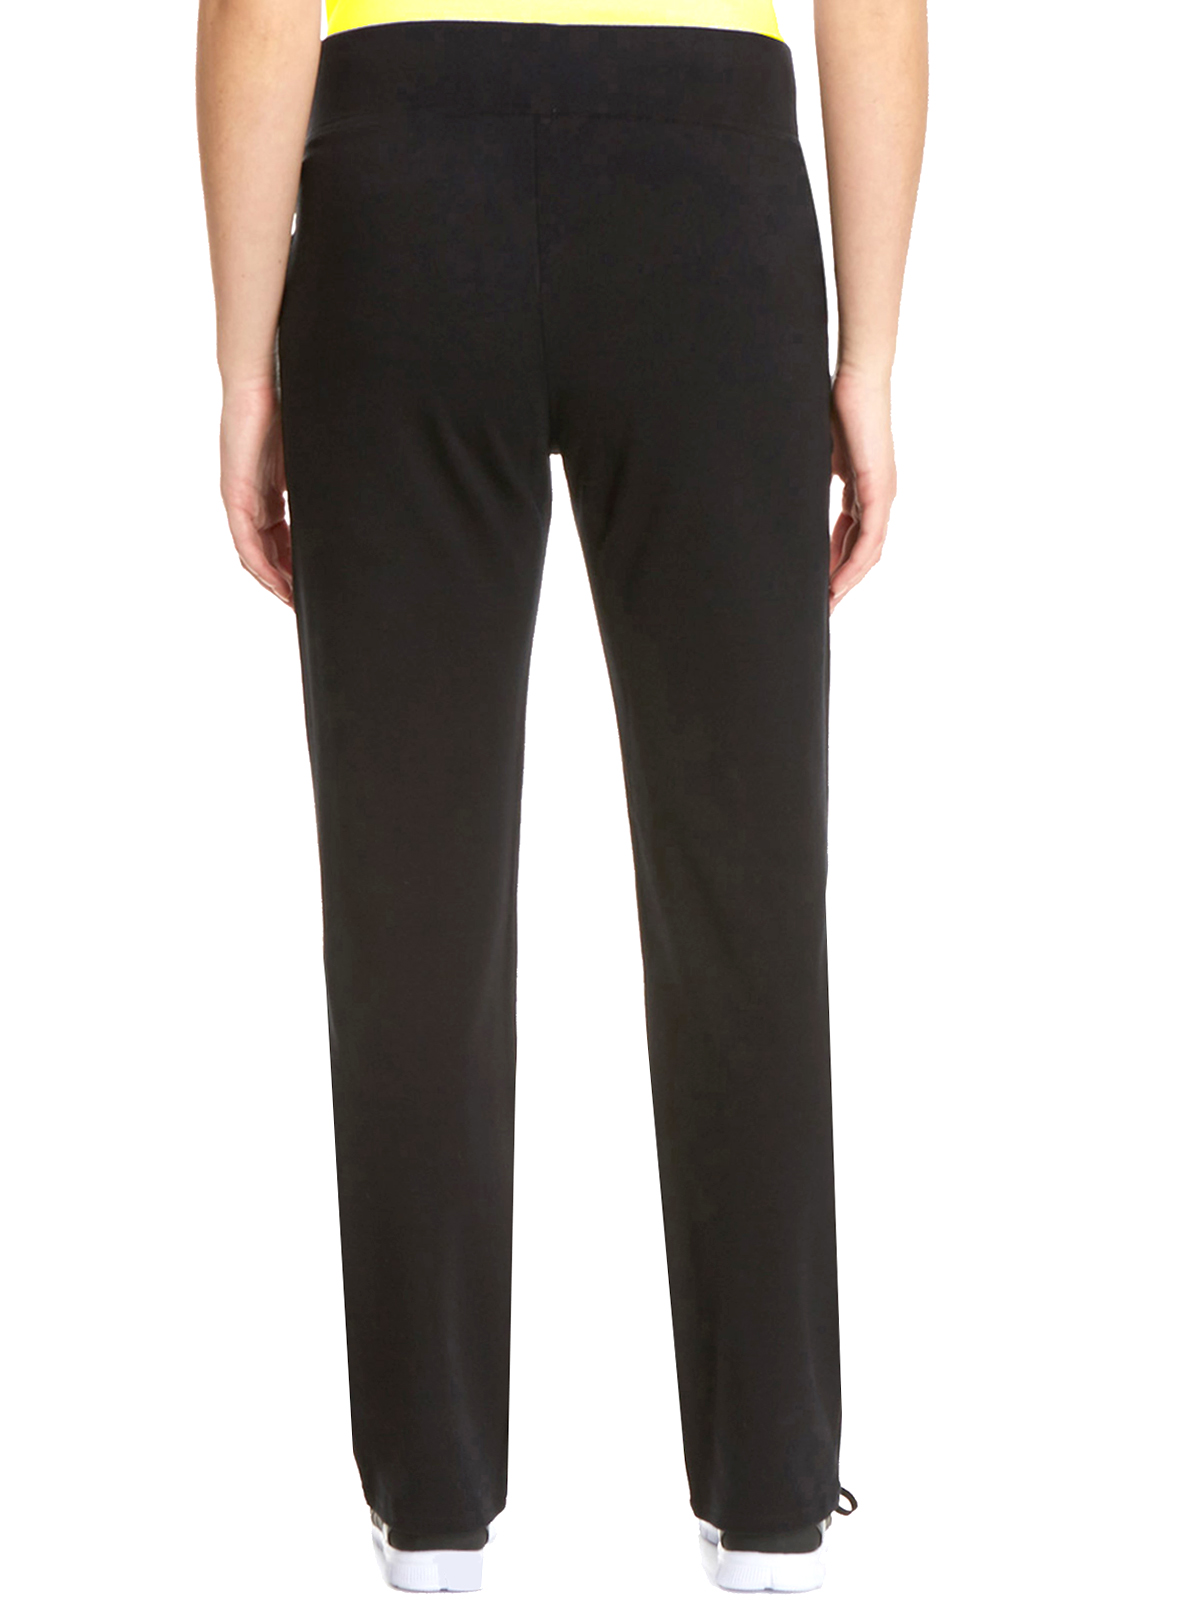 Marks and Spencer - - M&5 BLACK Cotton Rich Straight Leg Joggers - Plus ...